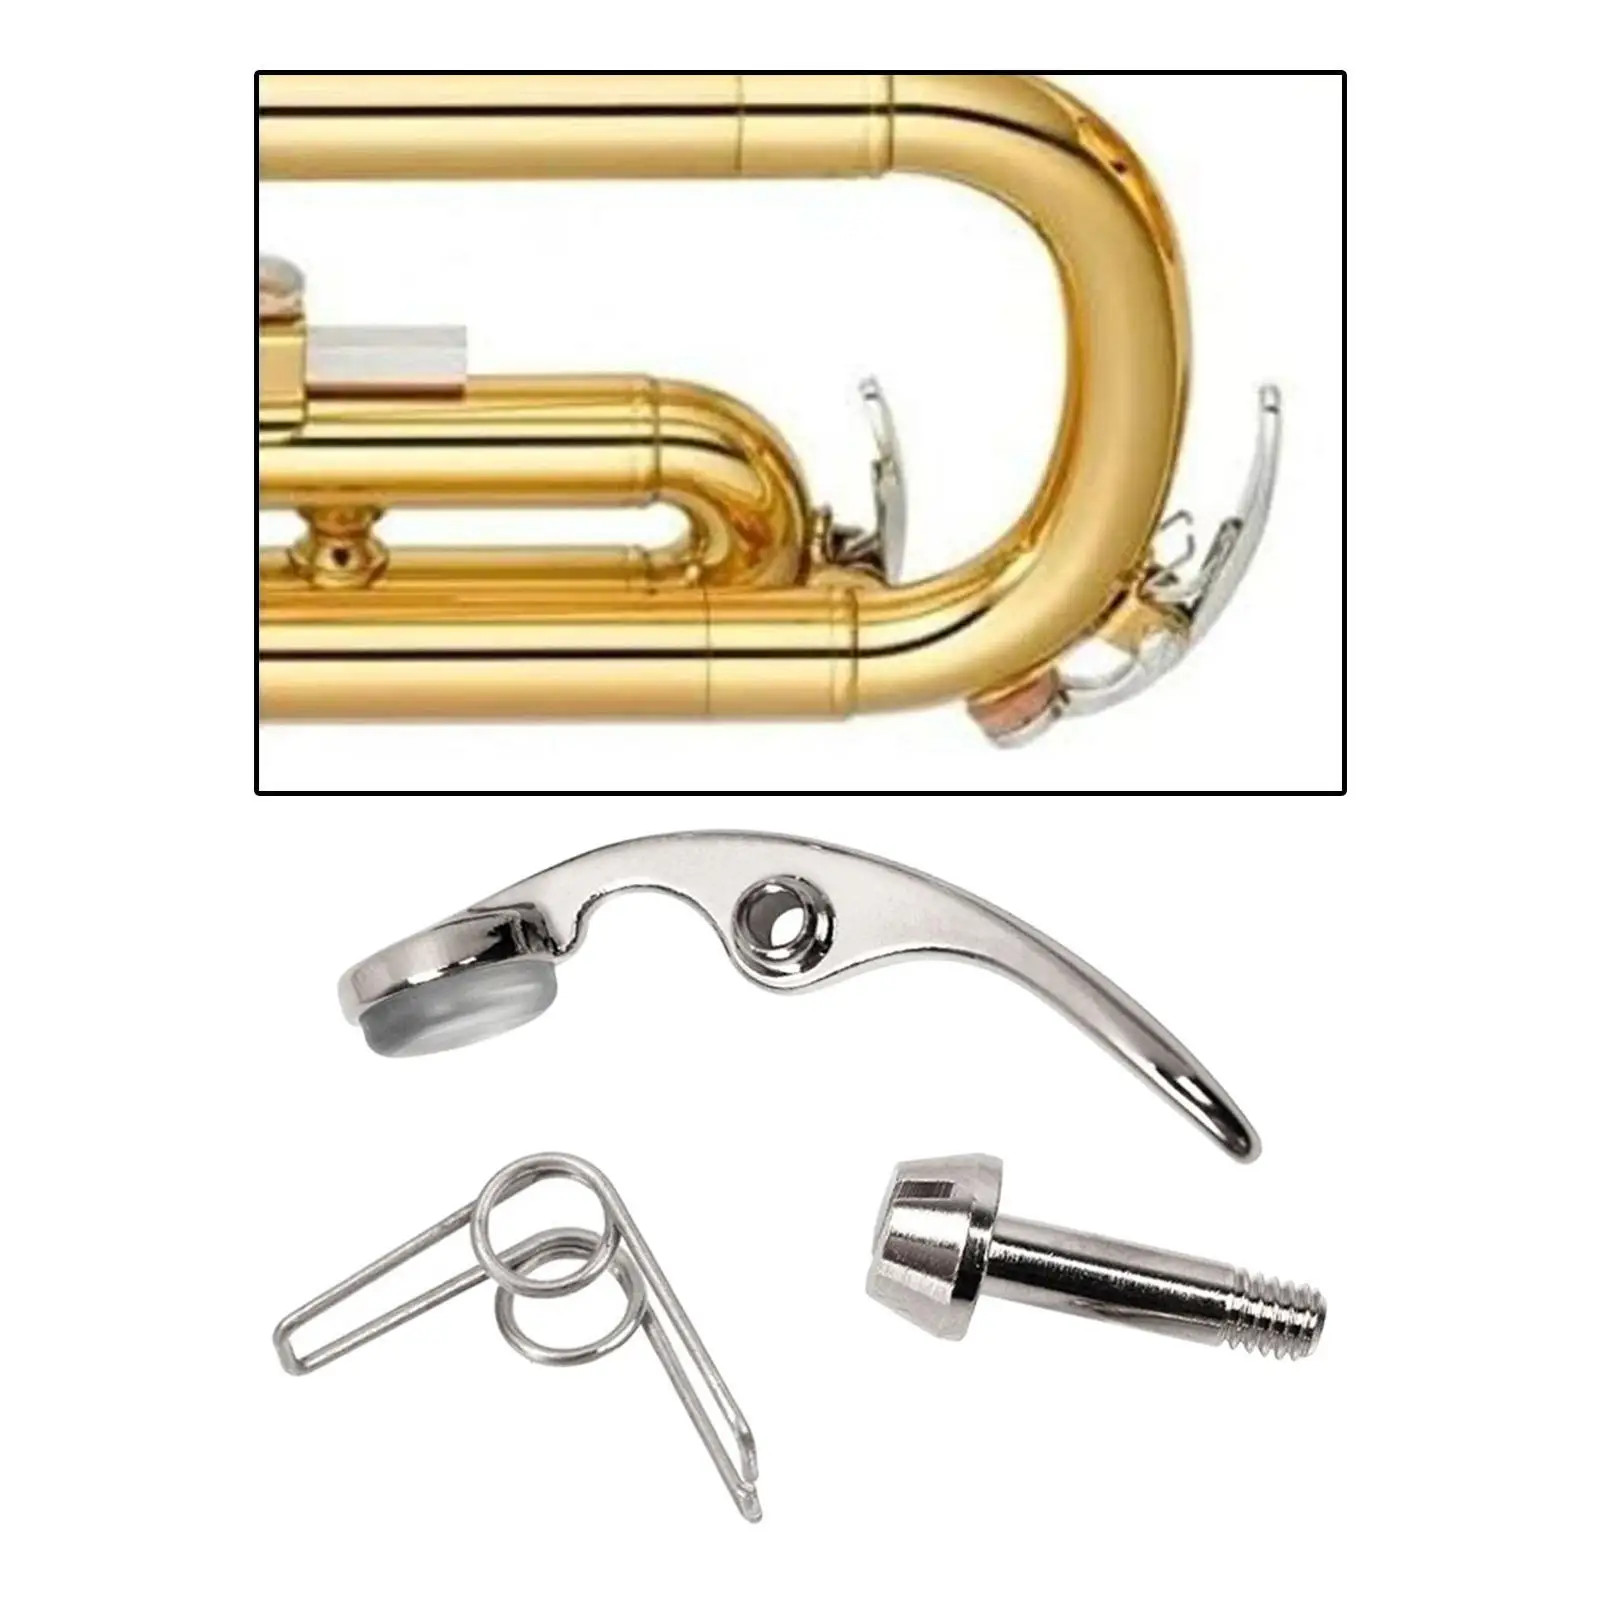 Trumpet Spit Valve Wind Instruments Accessory Water Value Valve with Springs Screws Drain Valve Key for Trumpet Brass Instrument